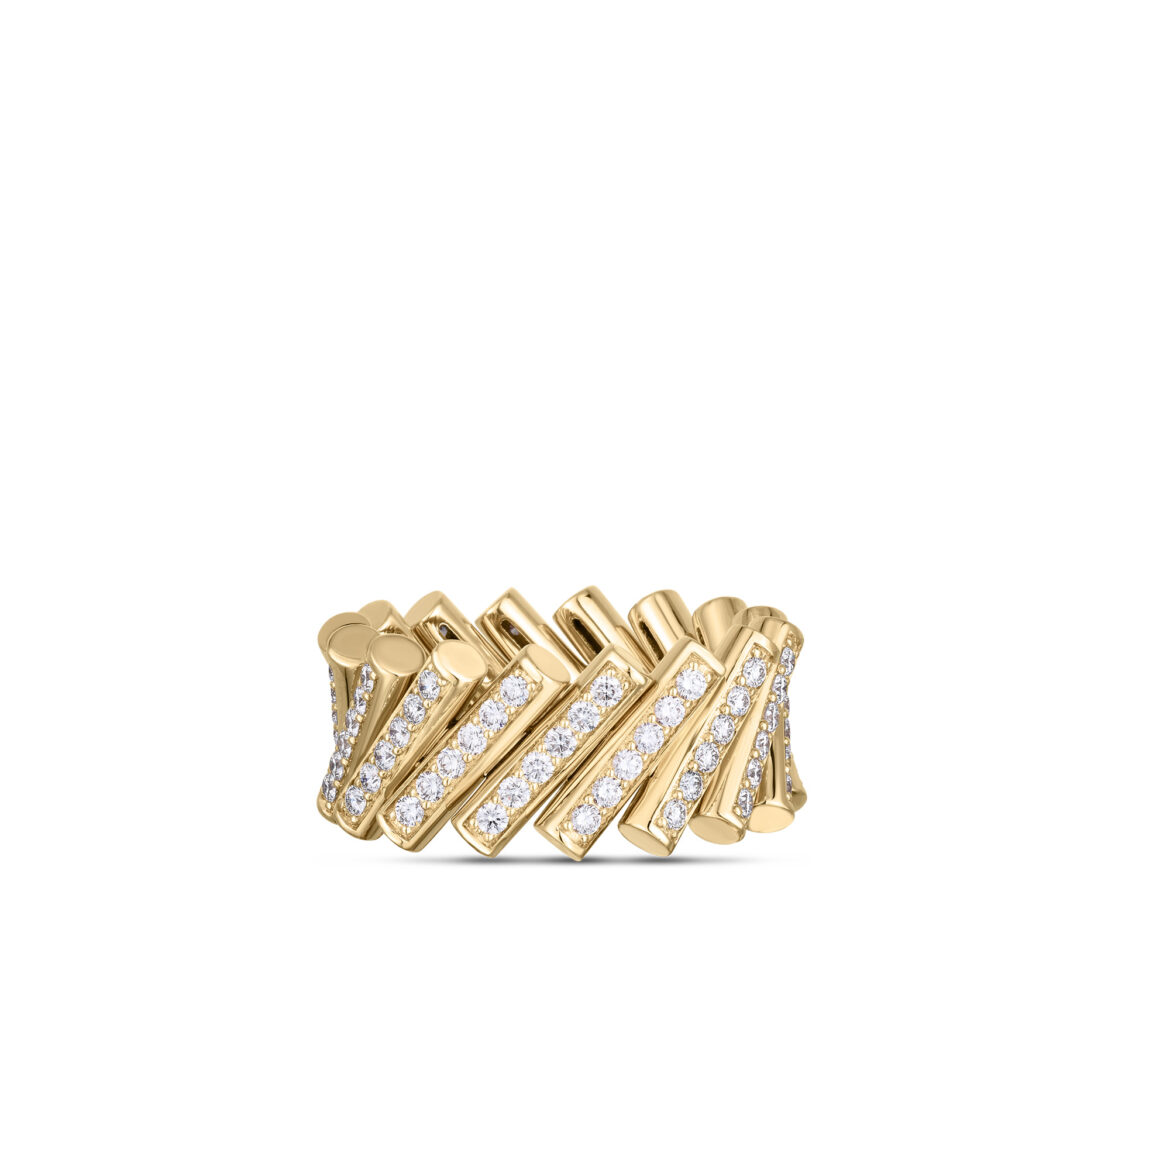 18K YELLOW GOLD DOMINO PAVE RING